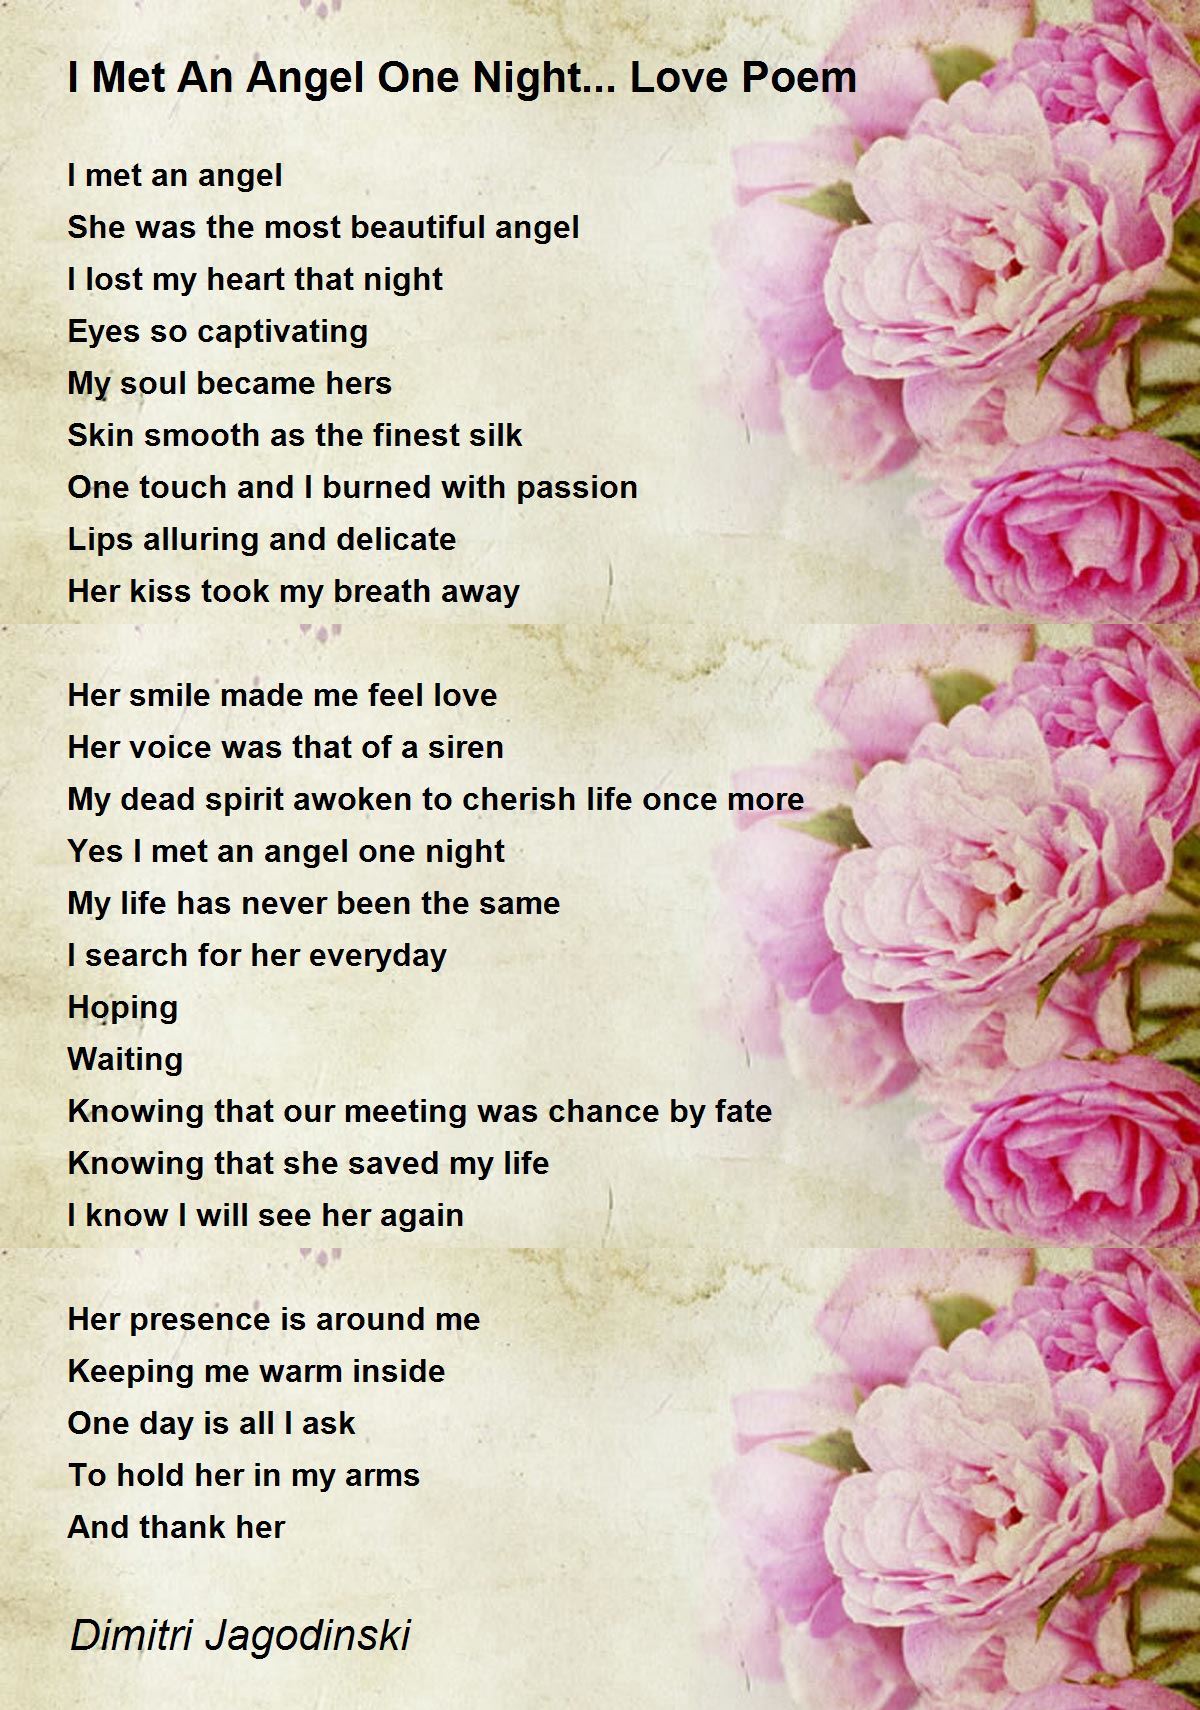 Nighttime poems for her